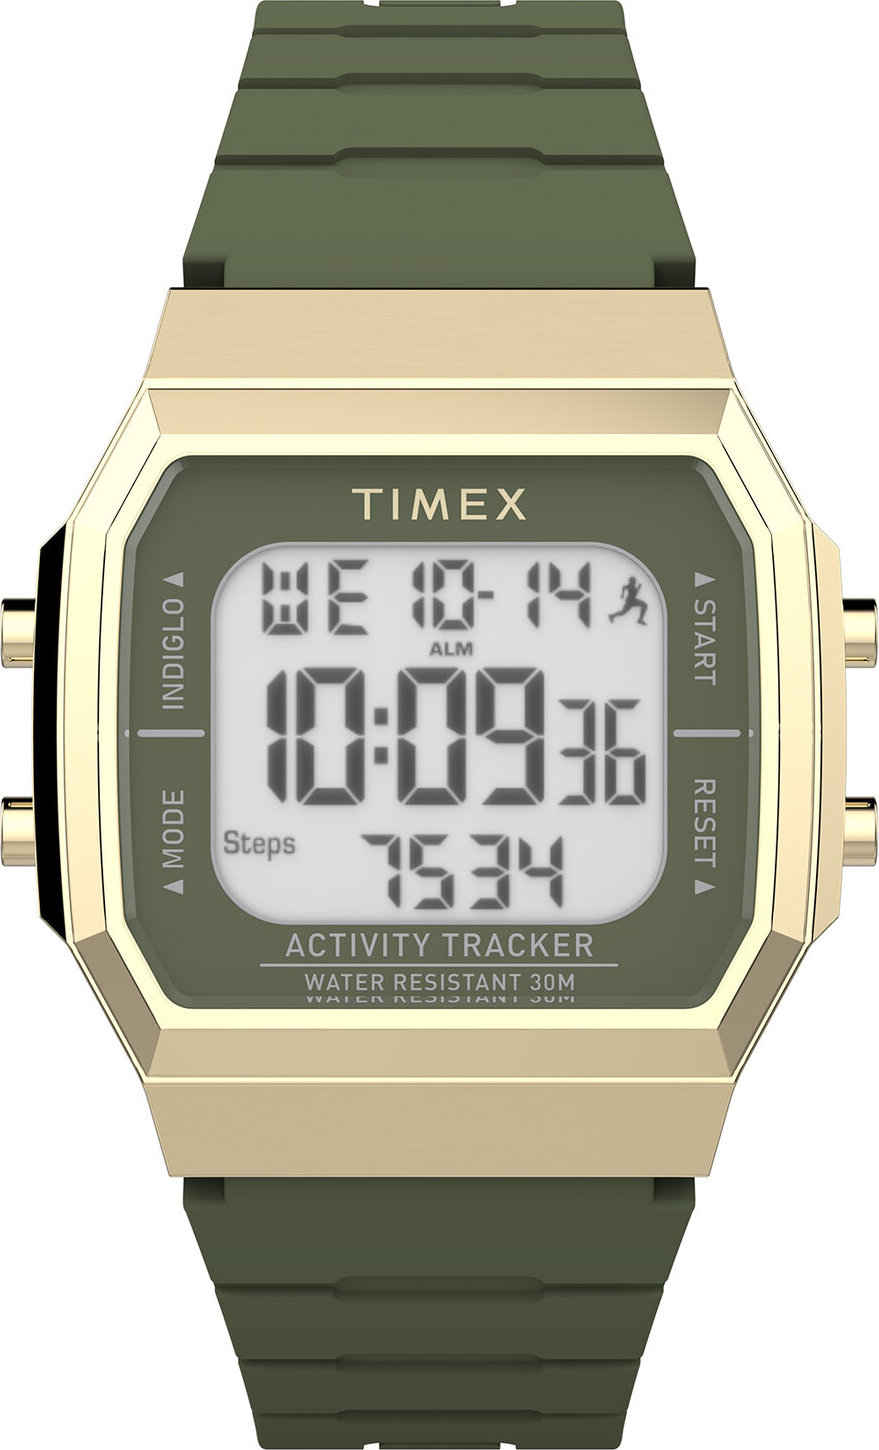 Hodinky Timex TW5M60800 Gold/Green